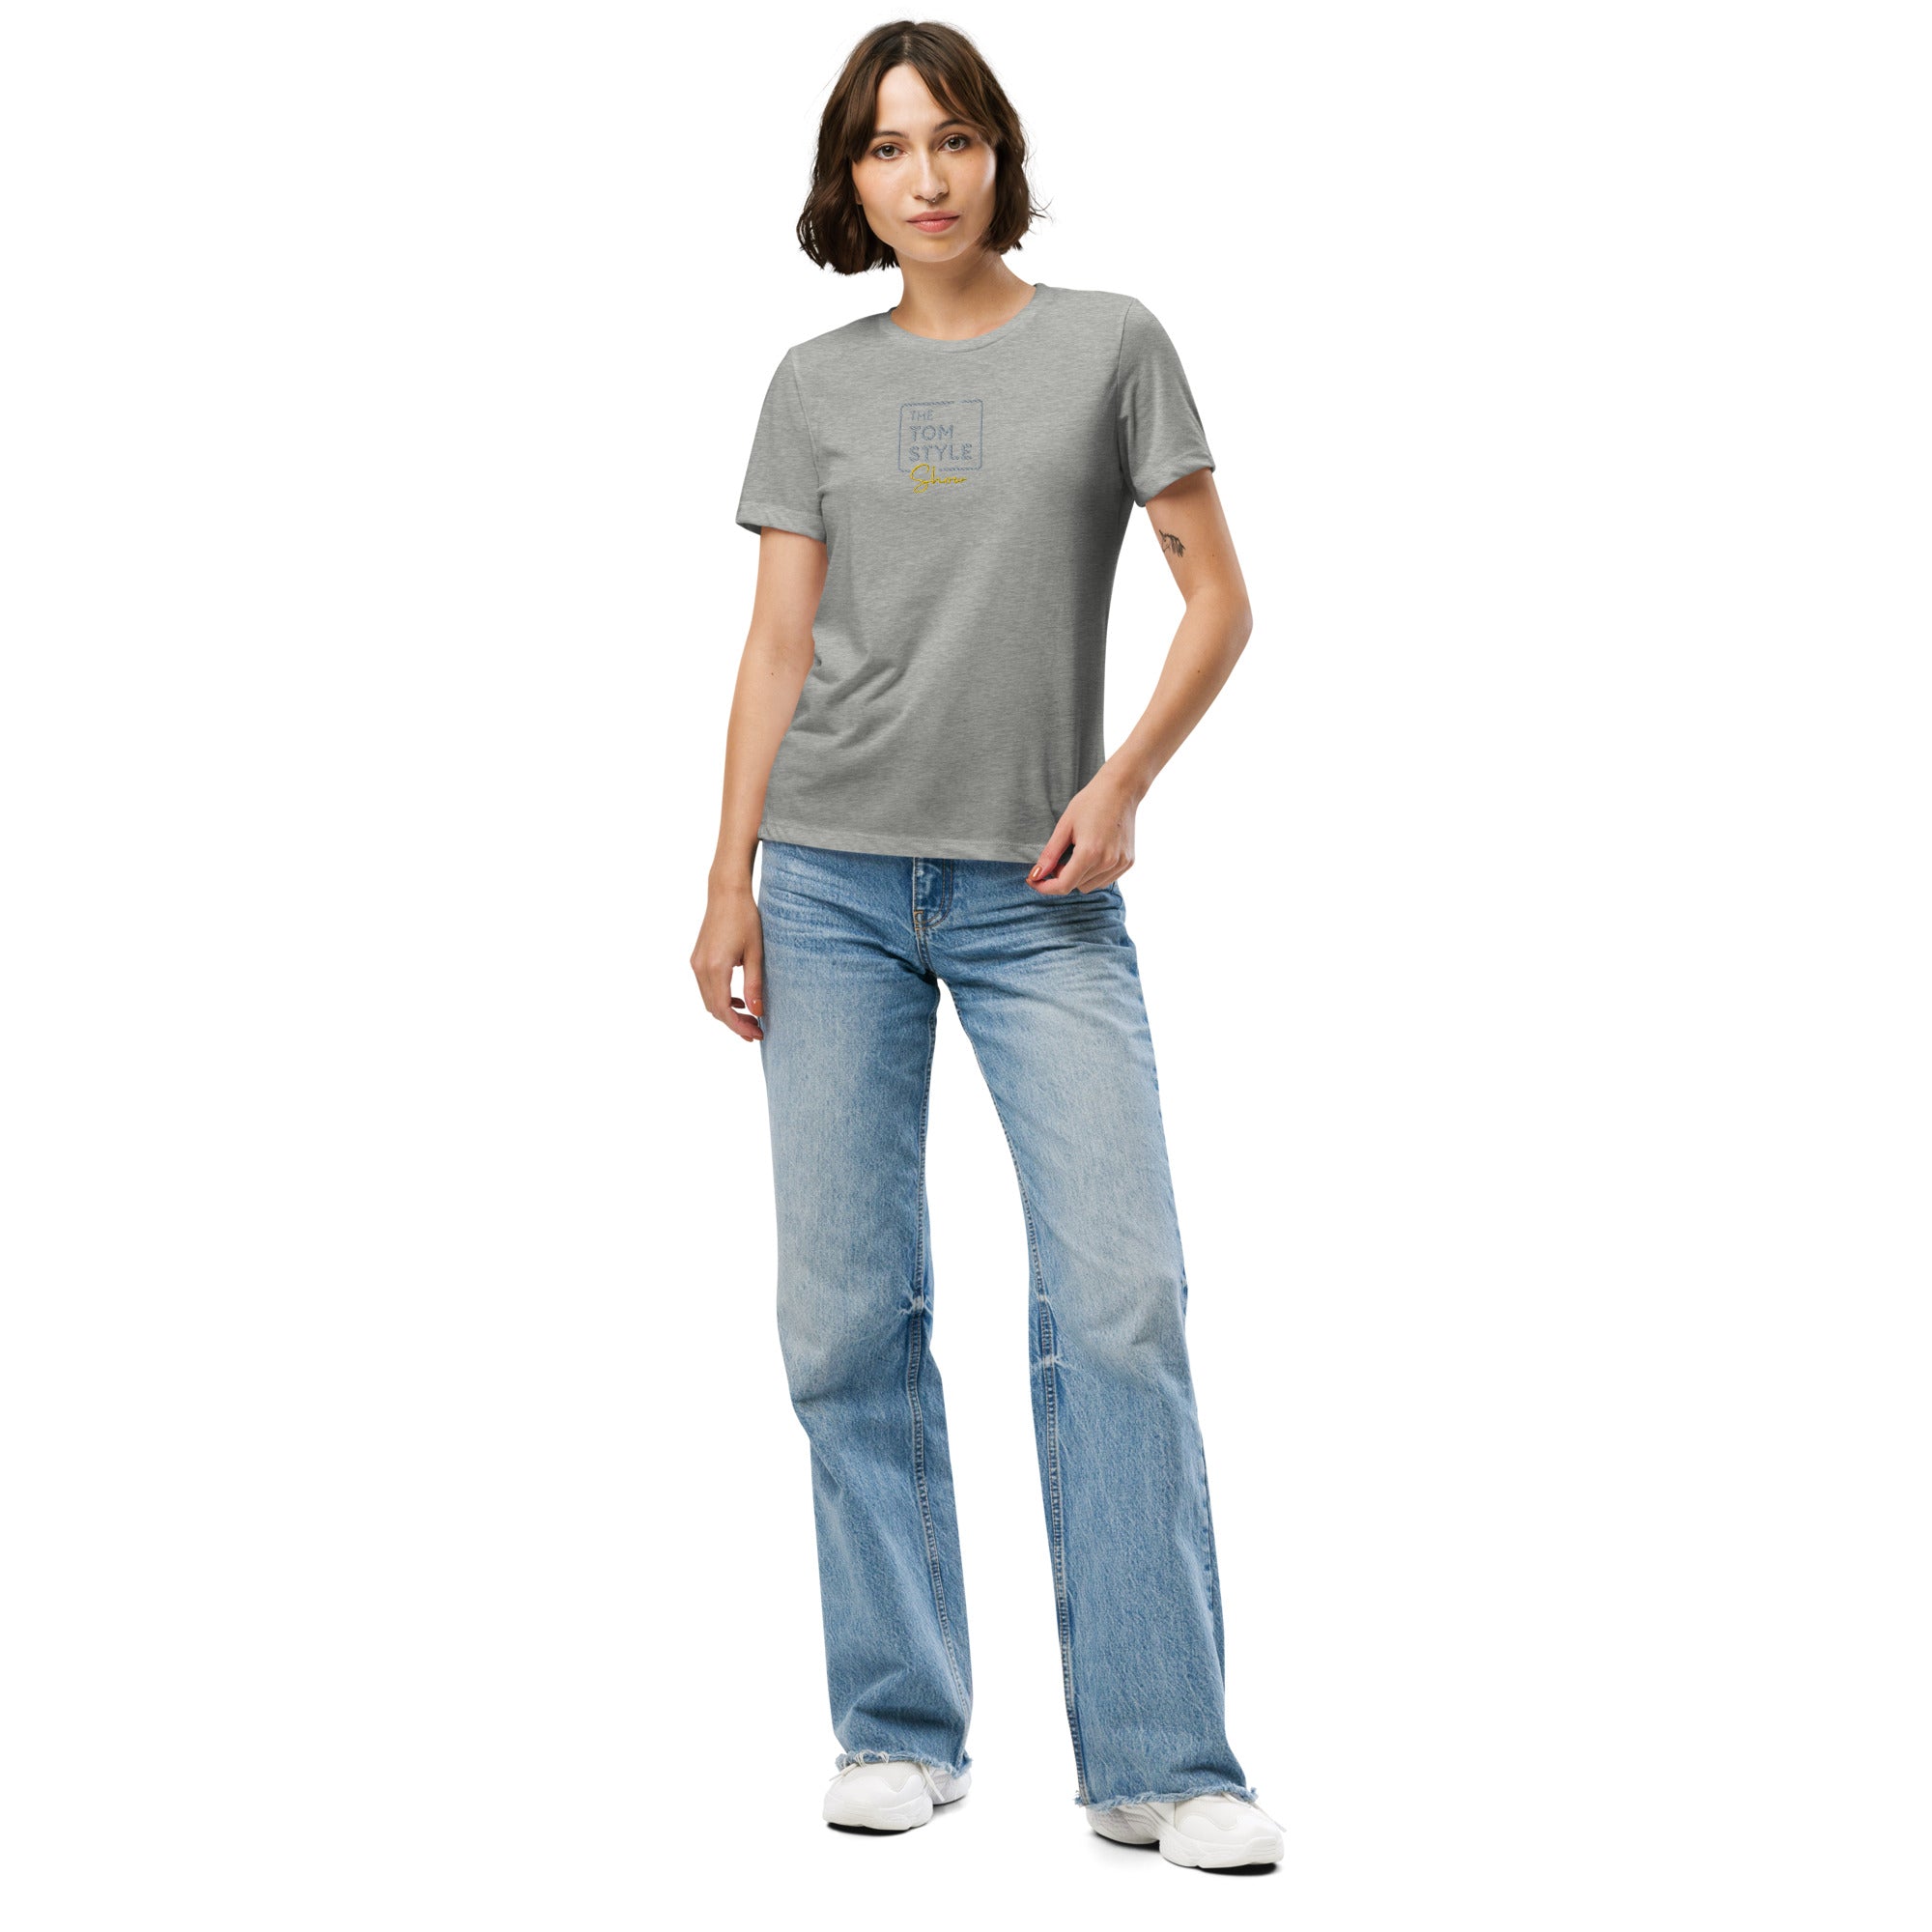 Women’s Relaxed Tri-blend T-shirt - Tom Style Show